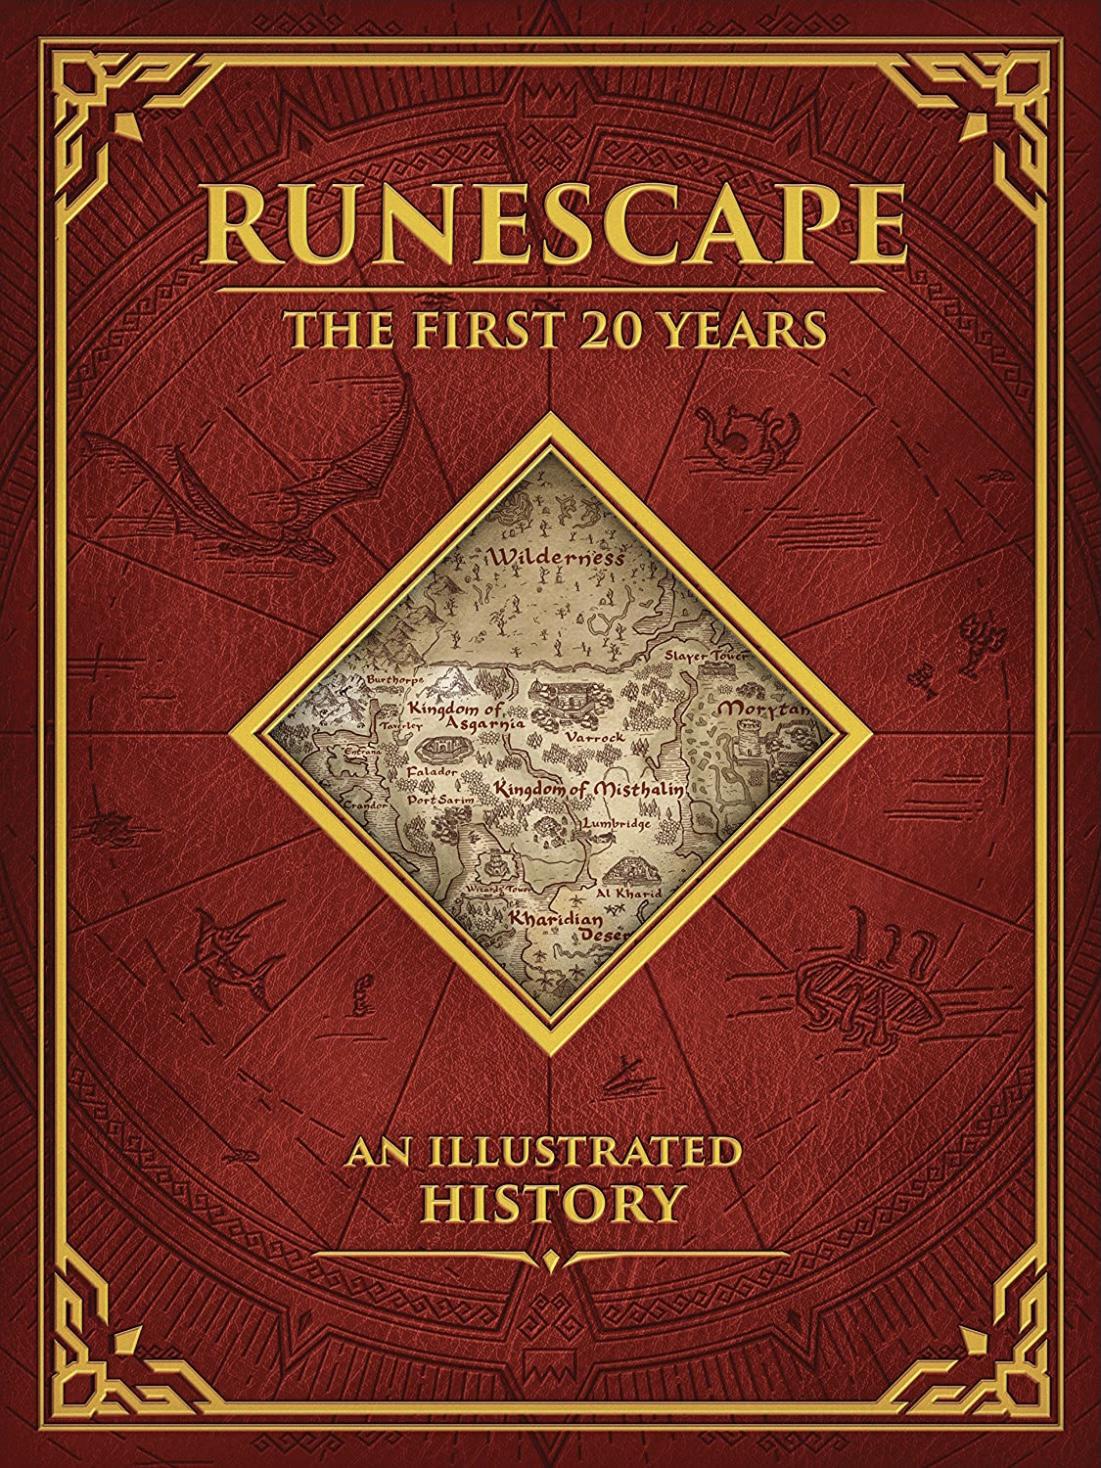 screenrant.com RuneScape: The First 20 Years Companion Coming From Dark Horse Comics